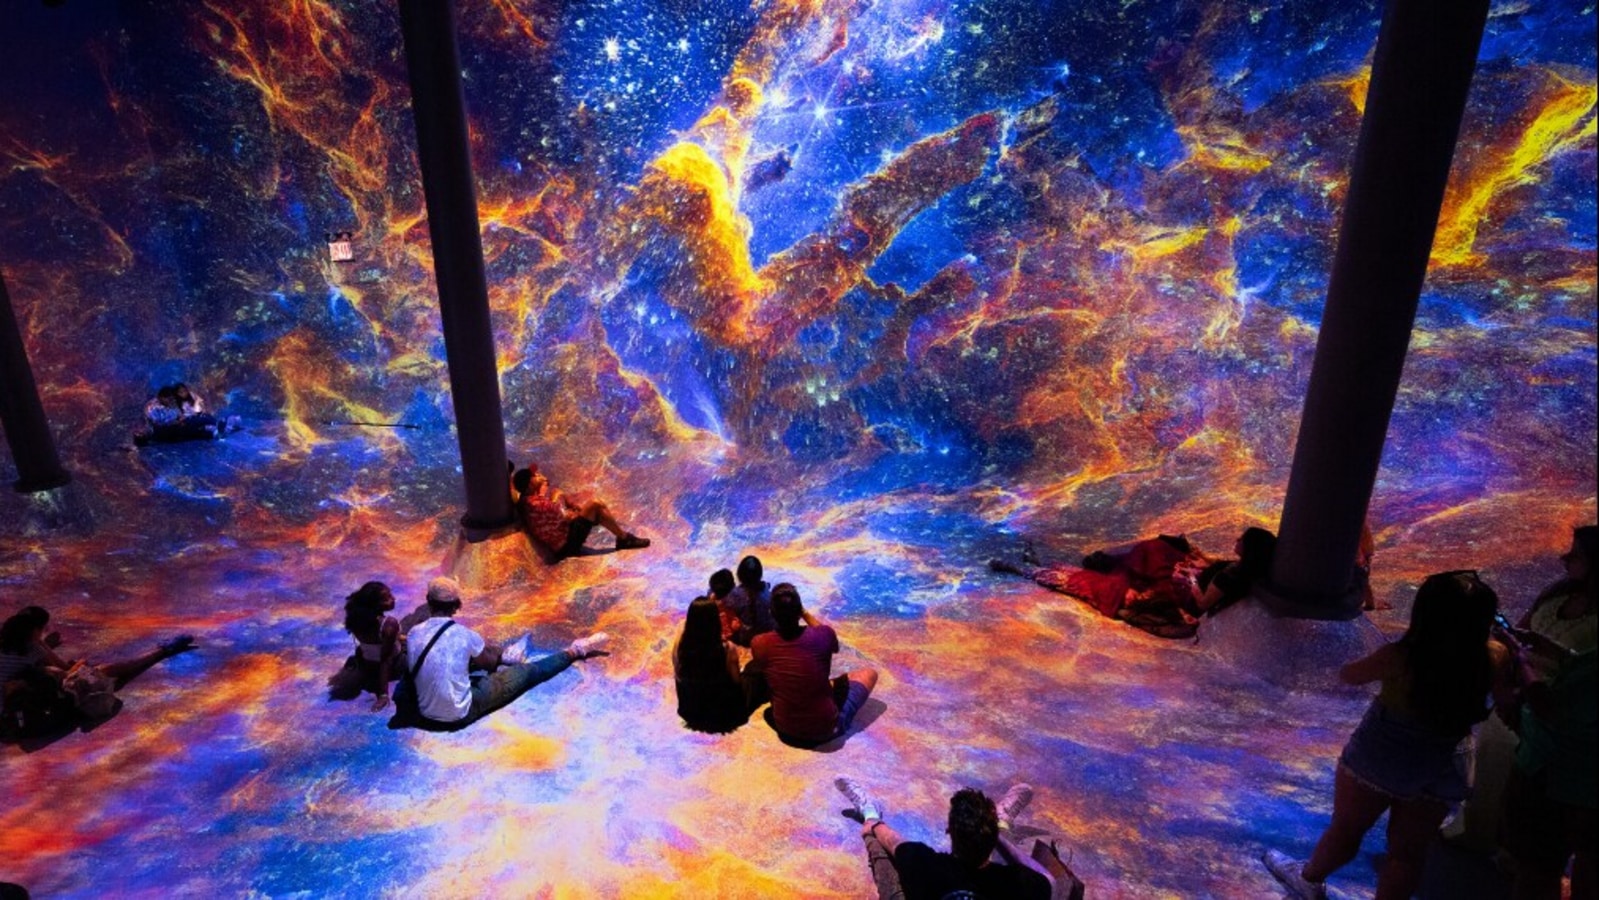 In NY art show, Artechouse turns NASA imagery into a stunning AI-aided psychedelic journey through Cosmos